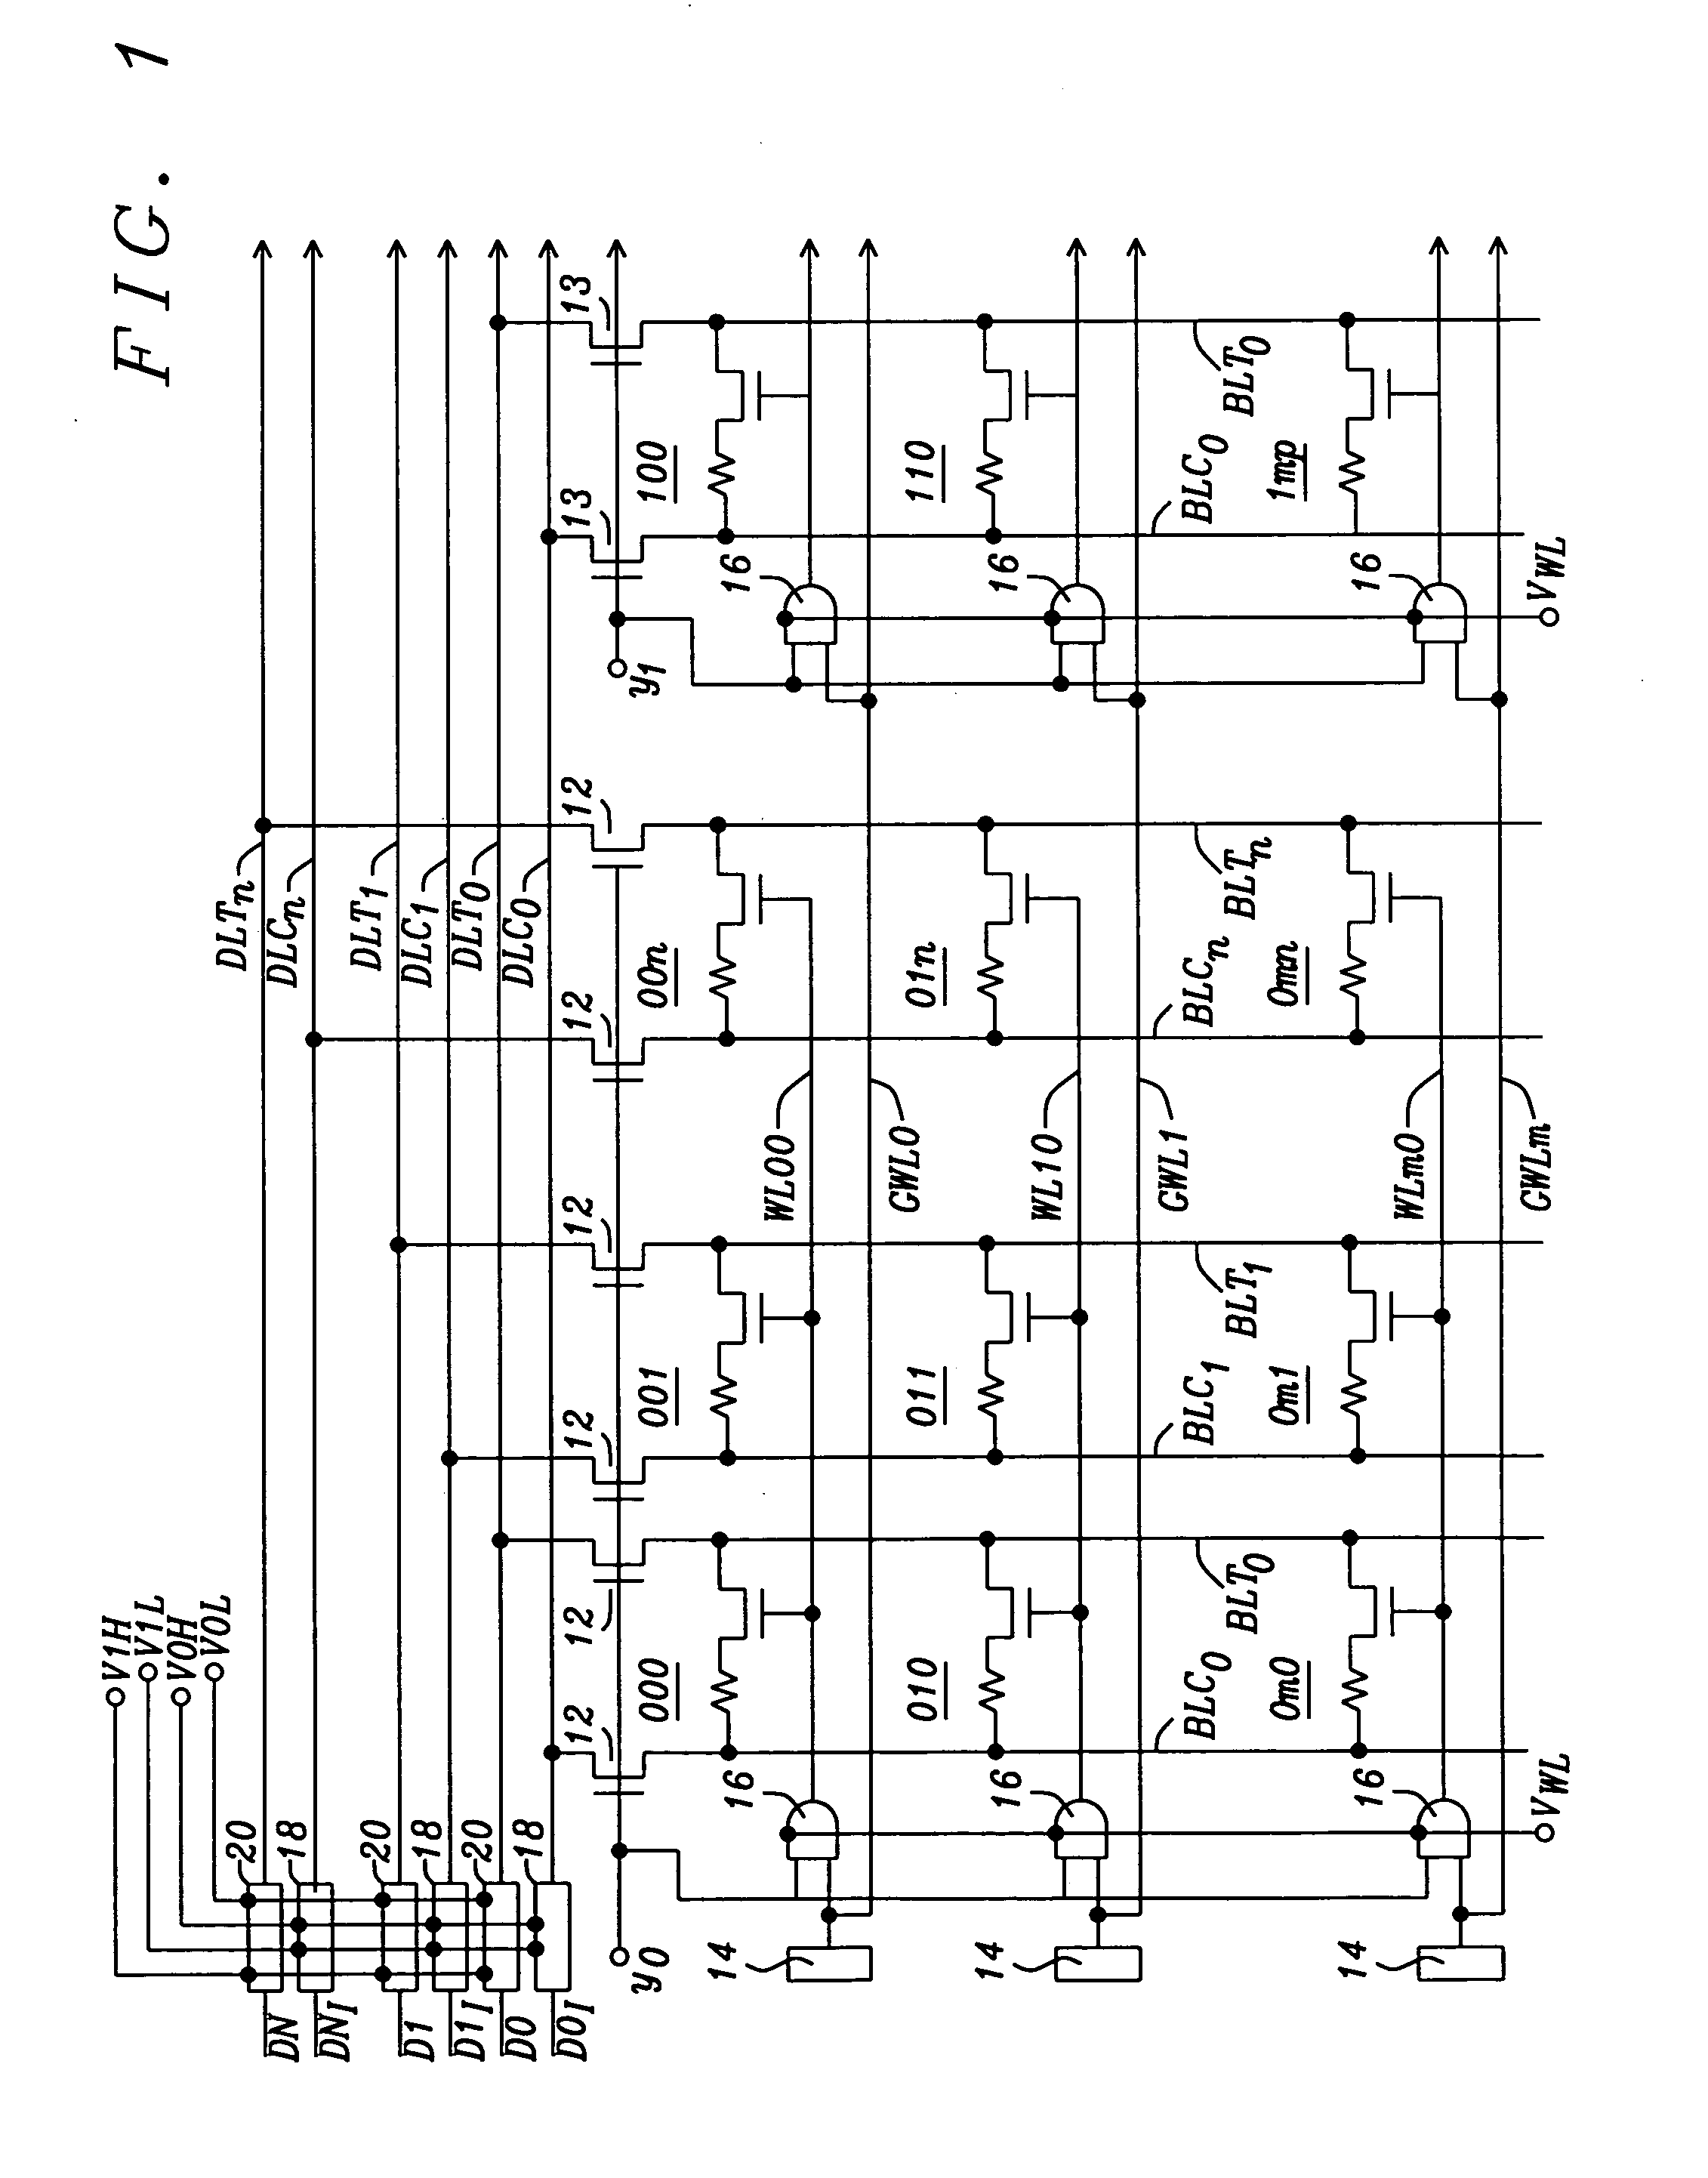 Gate drive voltage boost schemes for memory array II